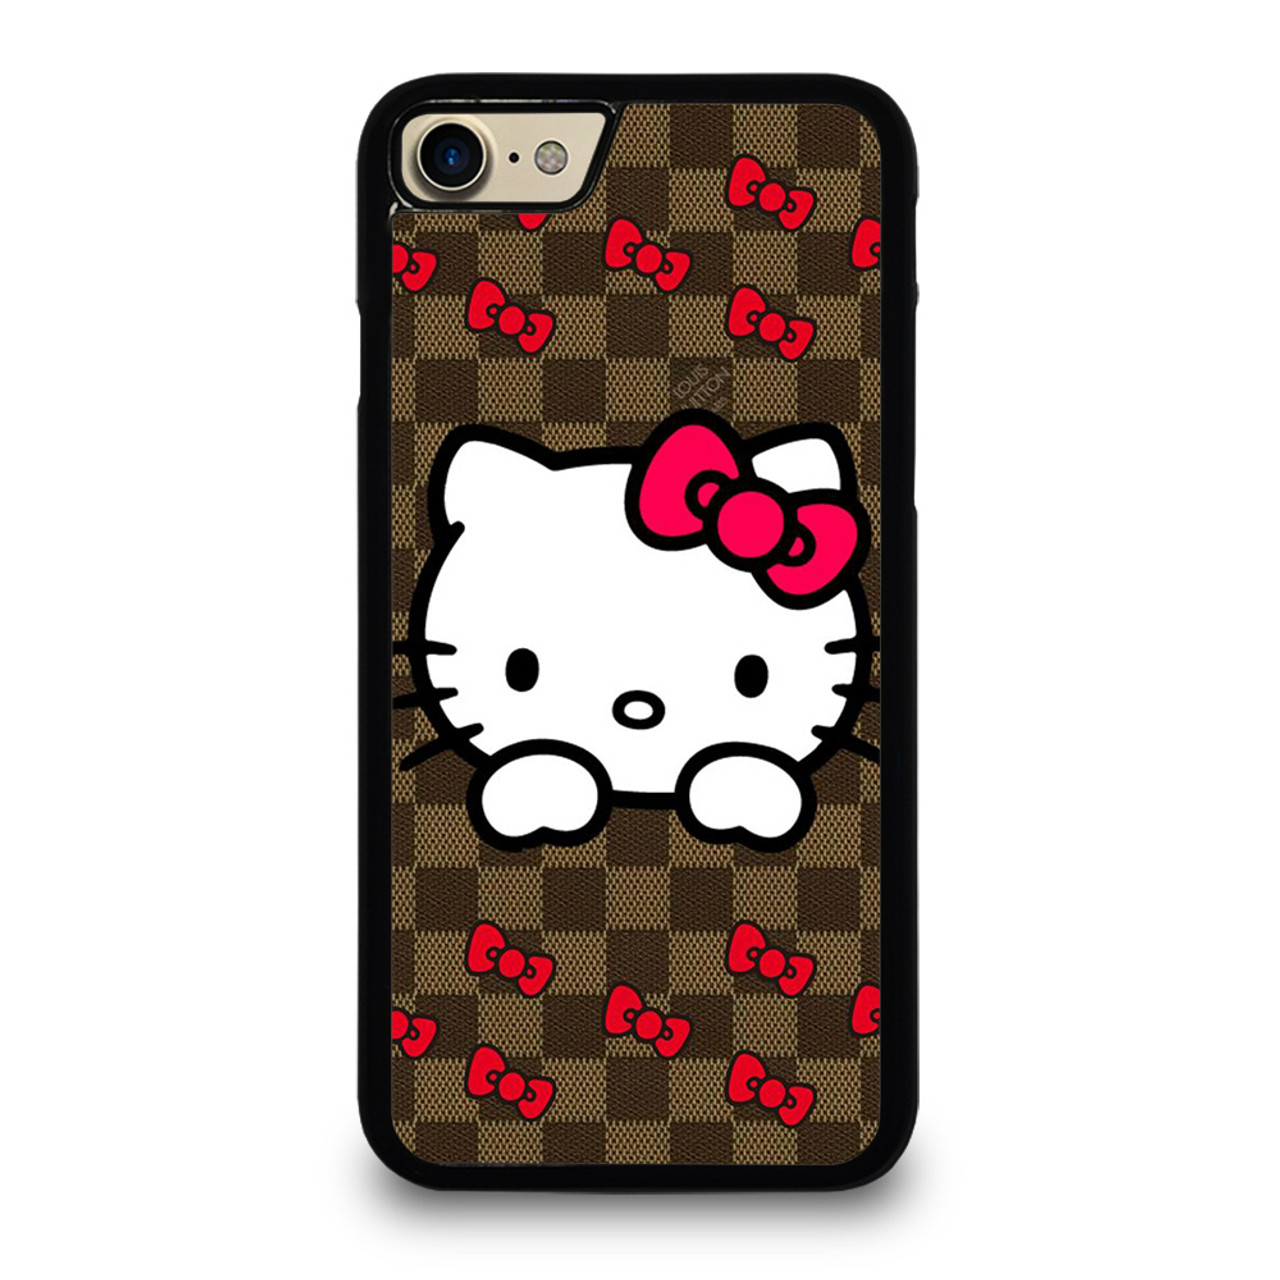 LOUIS VUITTON LV HELLO KITTY PATTERN iPhone 8 Case Cover